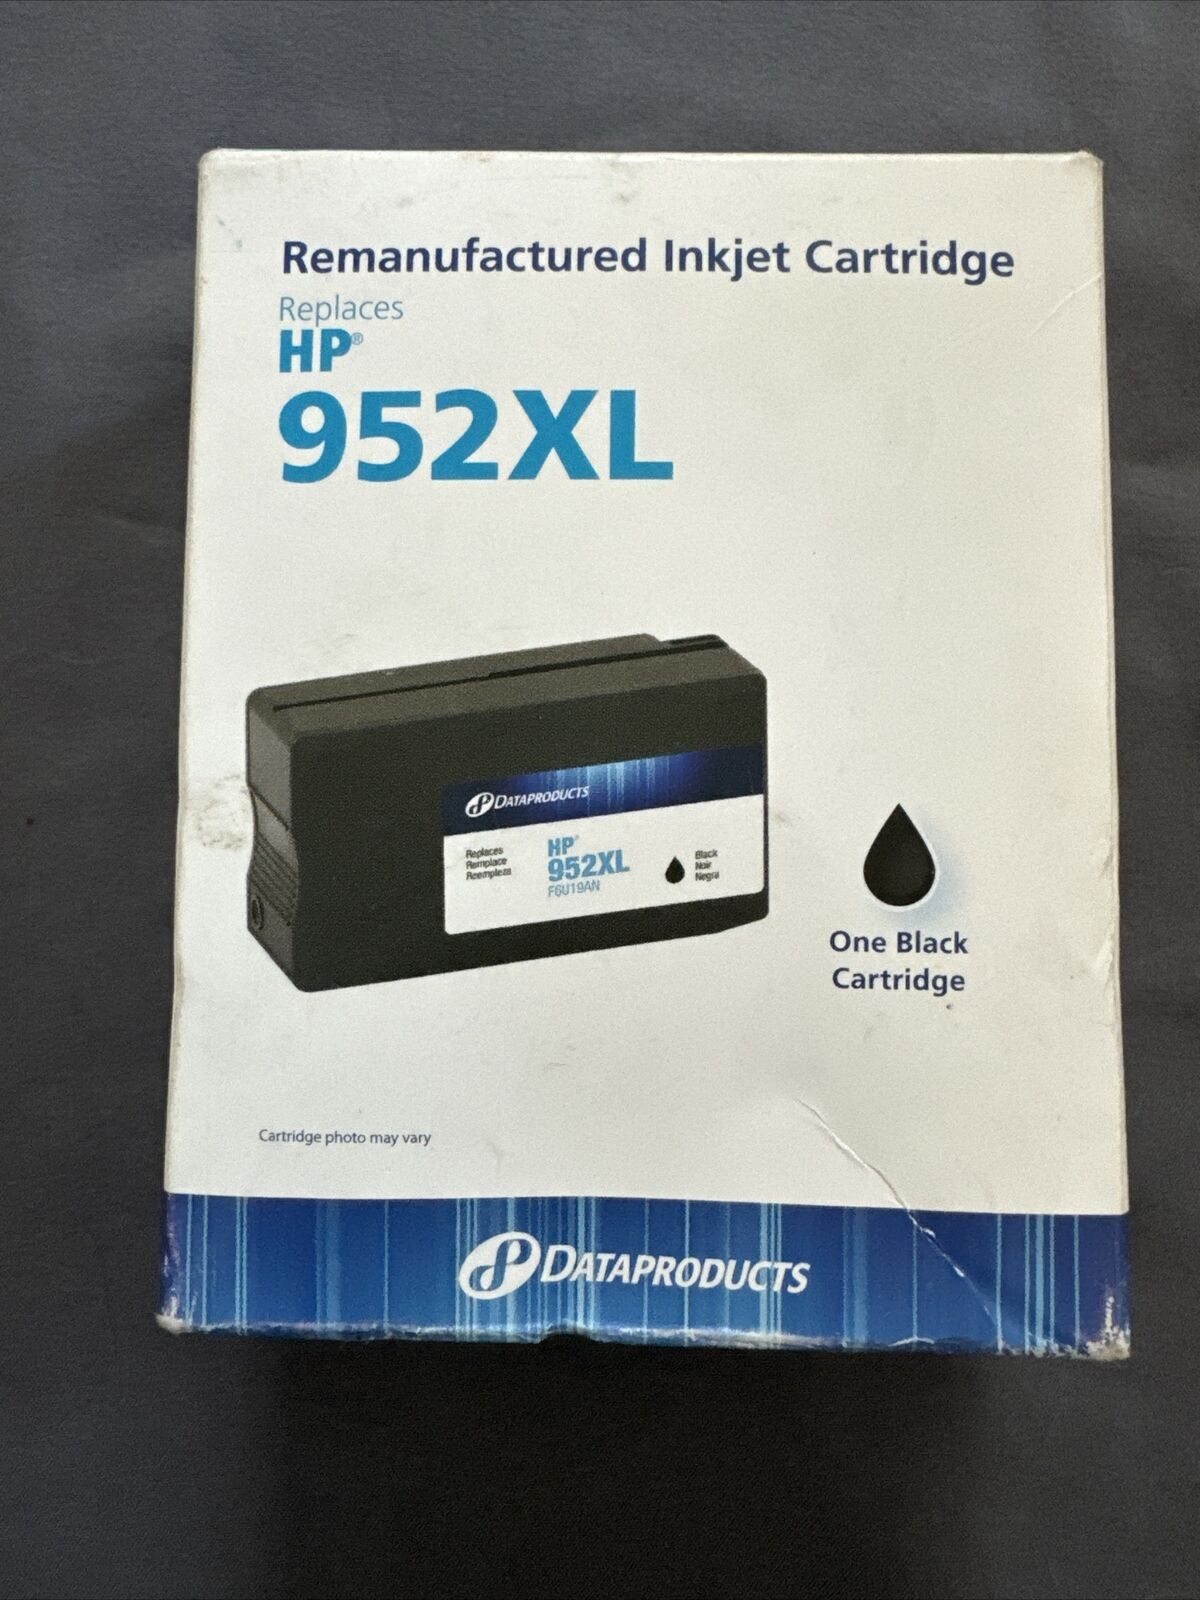 DataProducts Re manufactured Ink Cartridge Replacement HP 952XL Black Inkjet